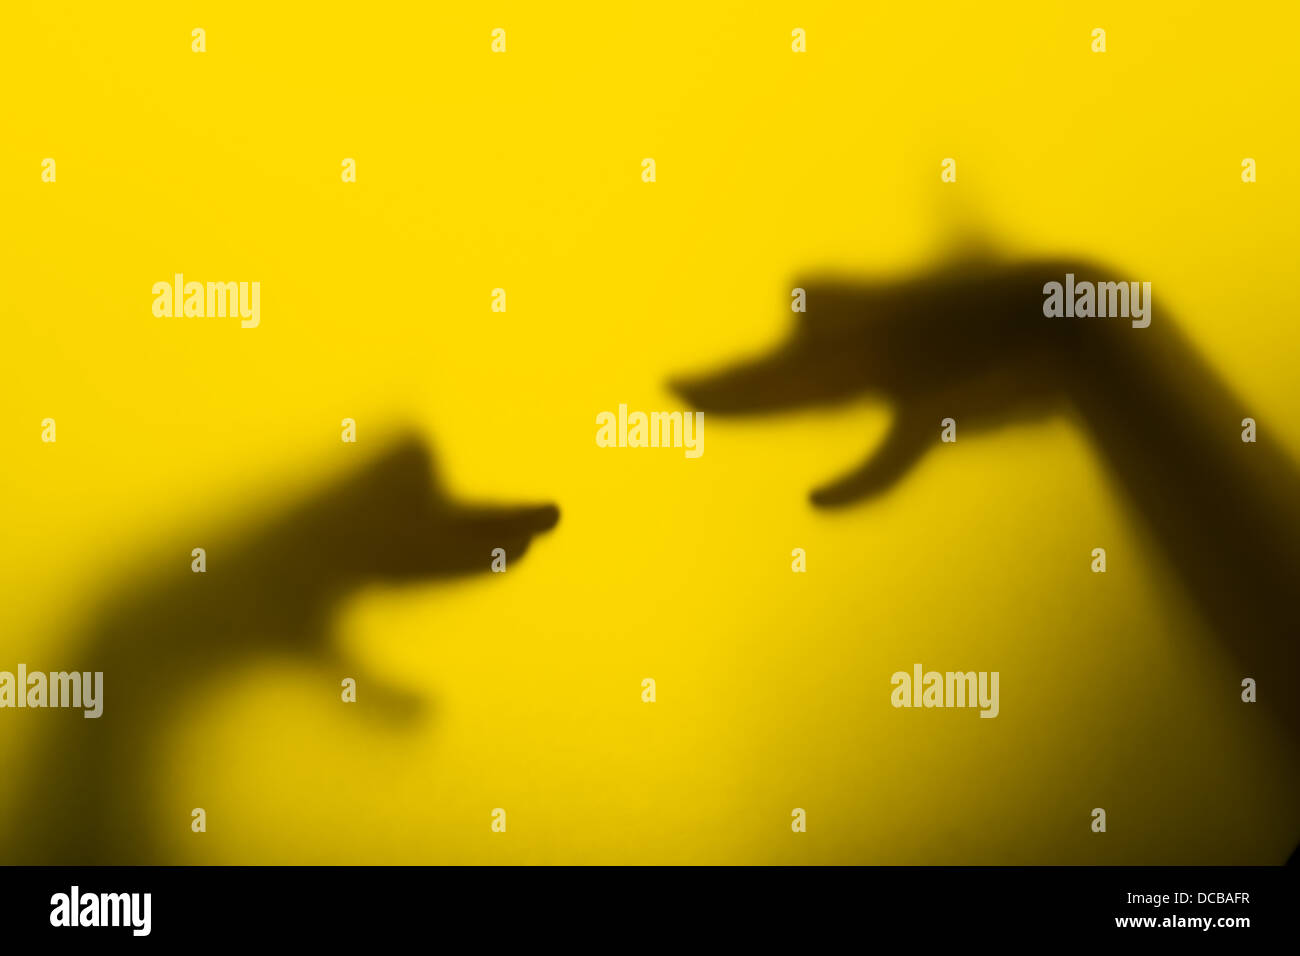 Shadow hand puppets (Dog's heads) Stock Photo